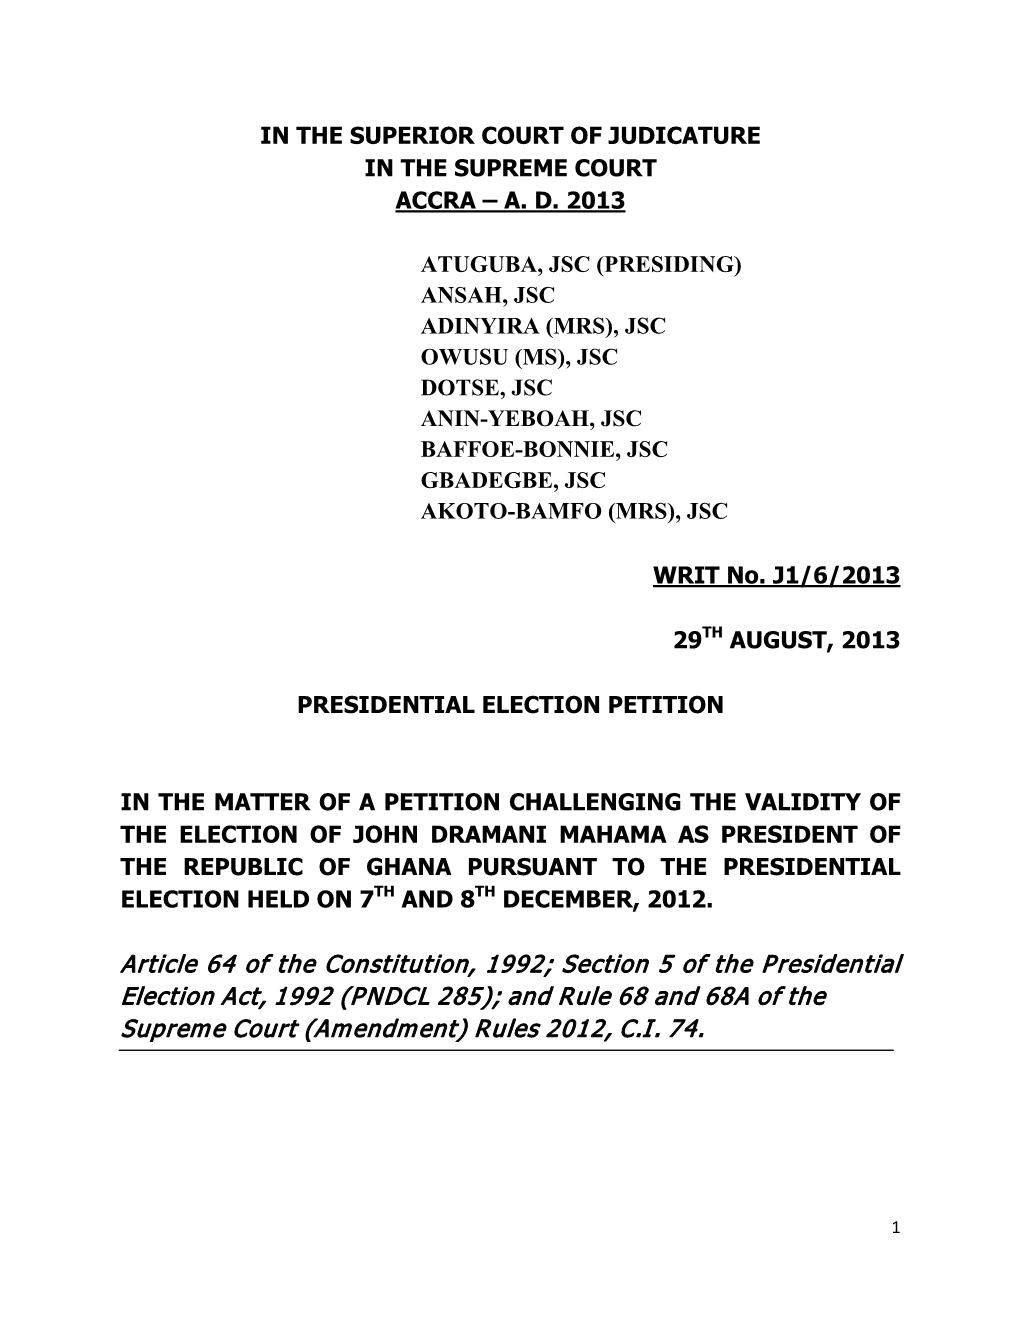 Section 5 of the Presidential Election Act, 1992 (PNDCL 285); and Rule 68 and 68A of the Supreme Court (Amendment) Rules 2012, C.I